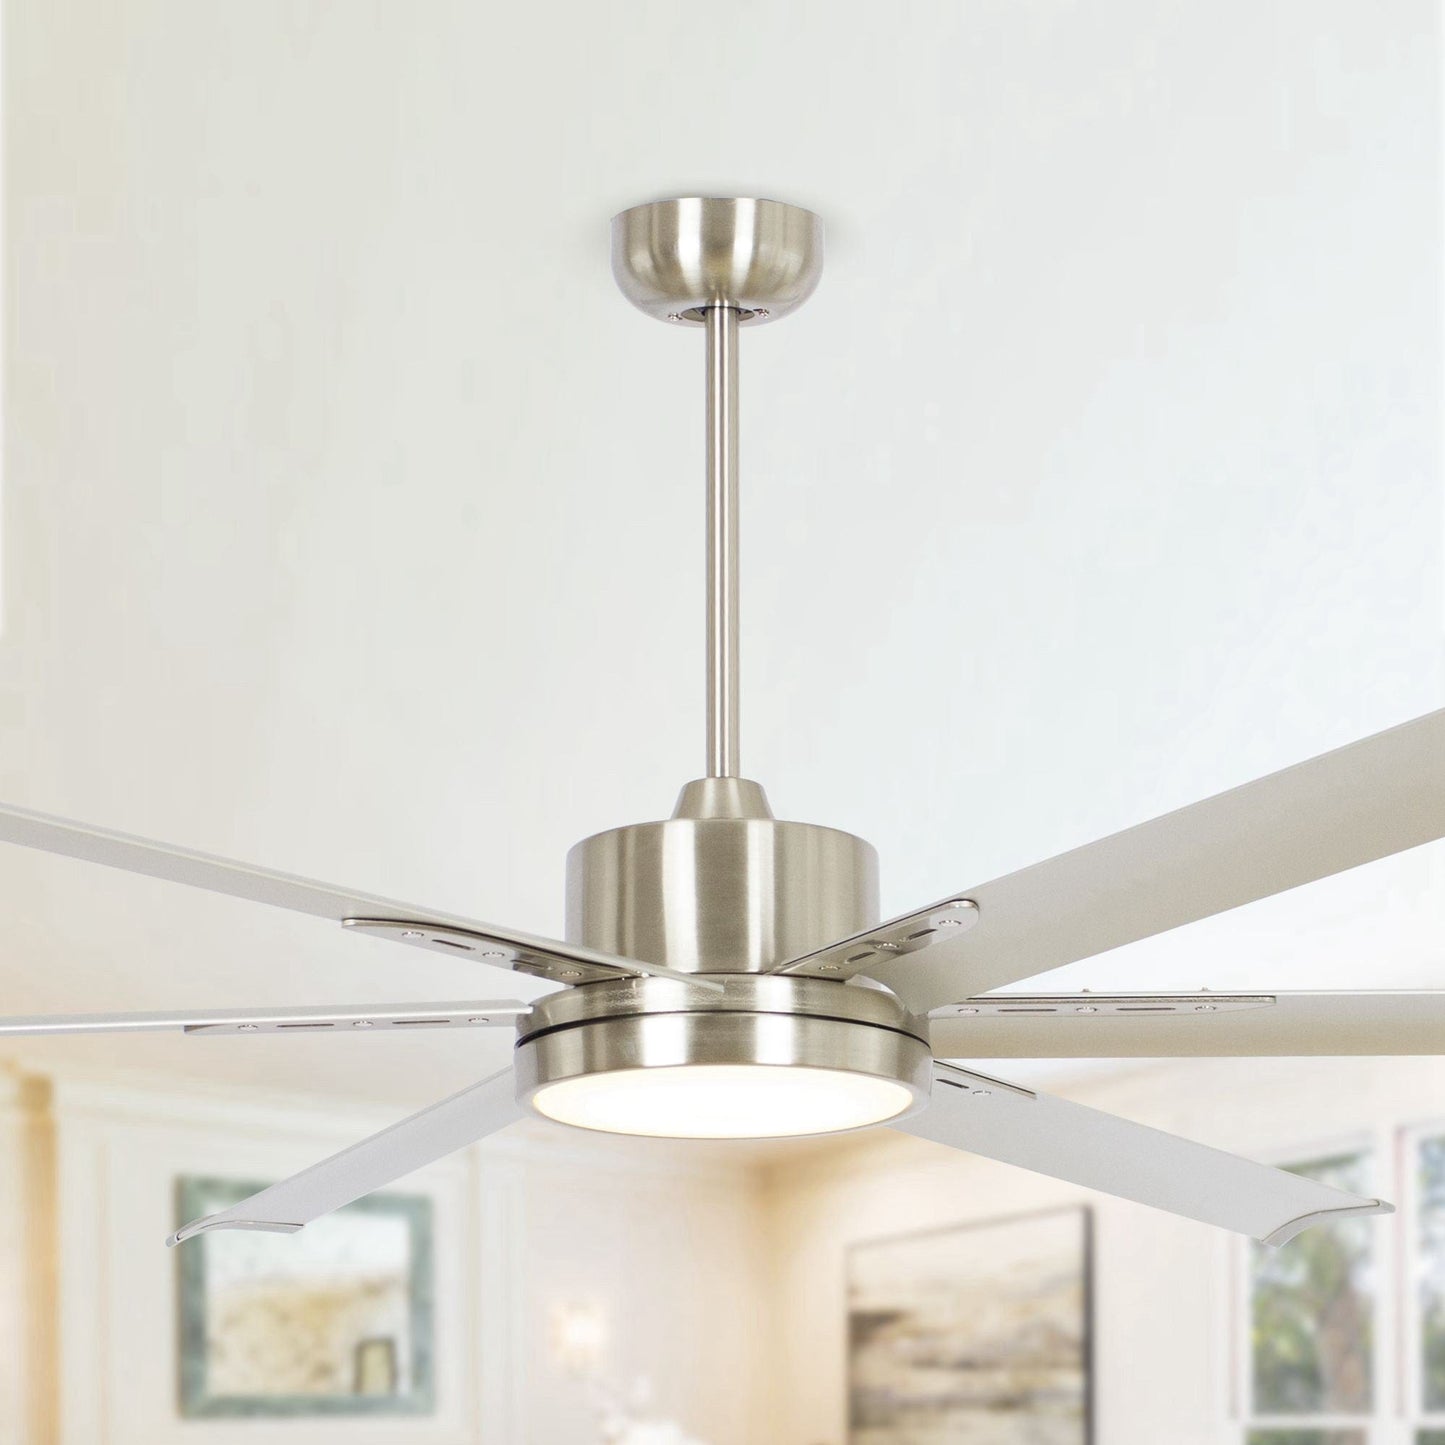 Parrot Uncle 65" Balachandran Modern DC Motor Downrod Mount Ceiling Fan with Lighting and Remote Control